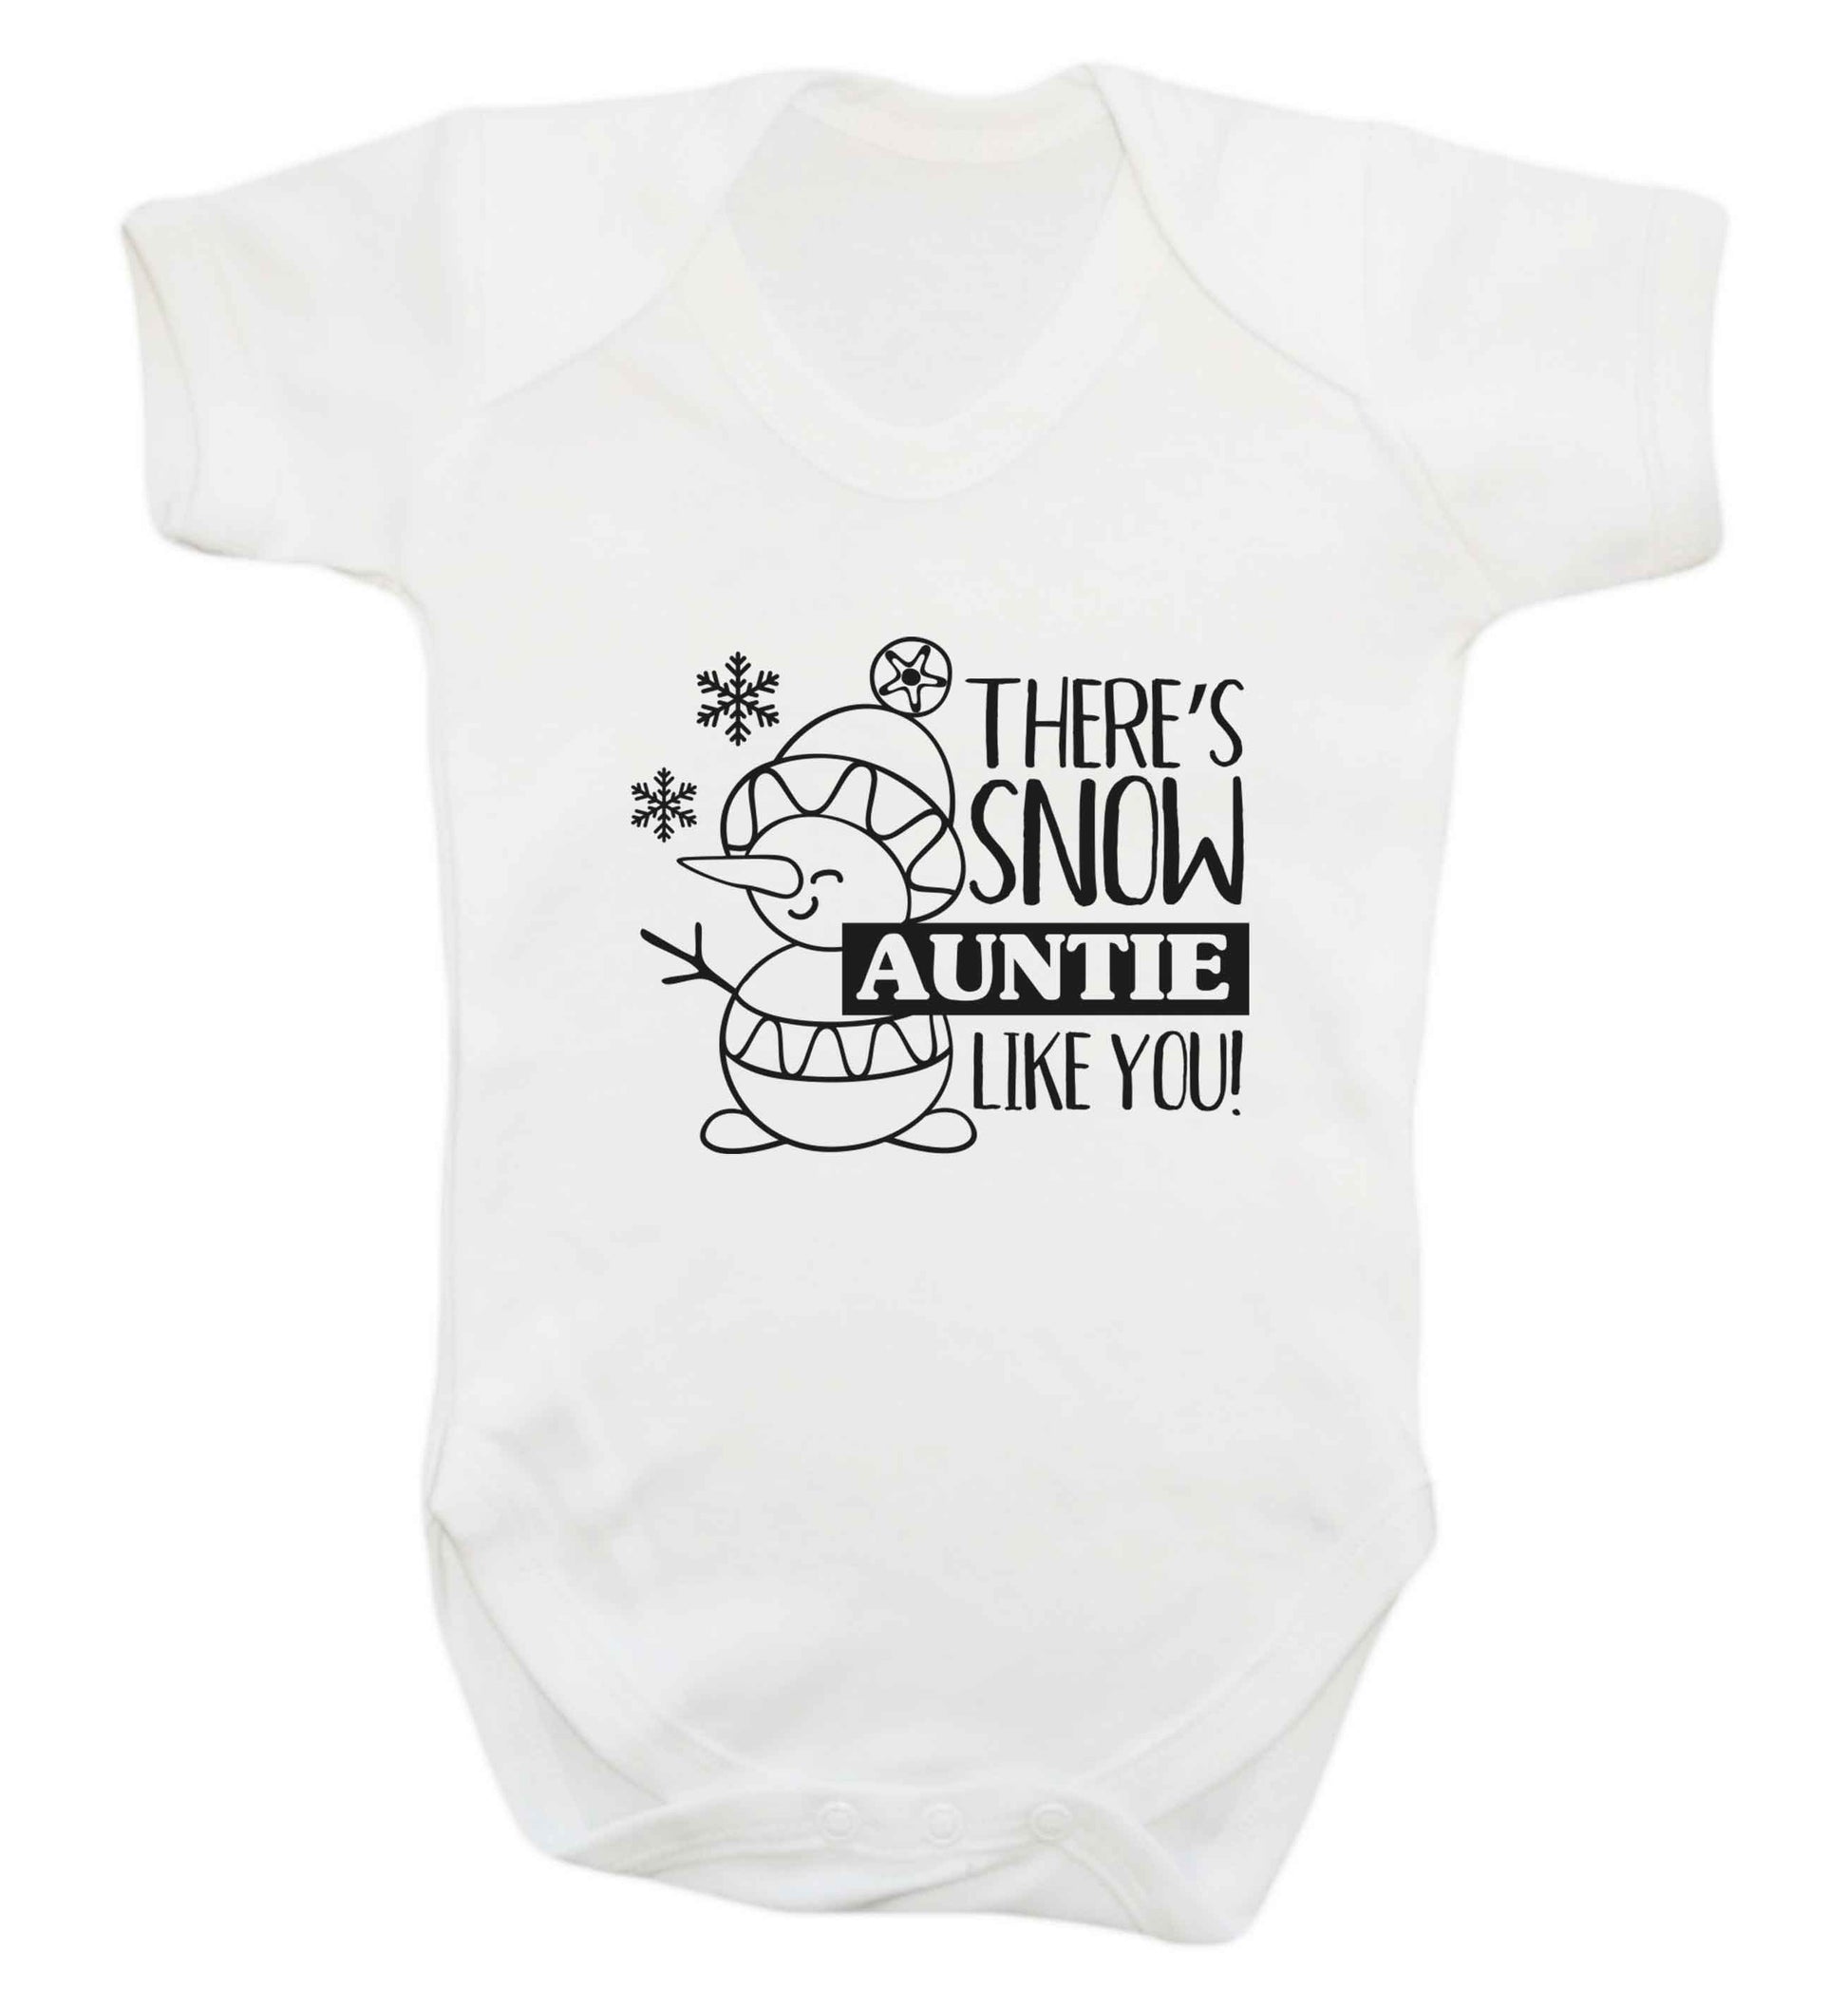 There's snow auntie like you baby vest white 18-24 months